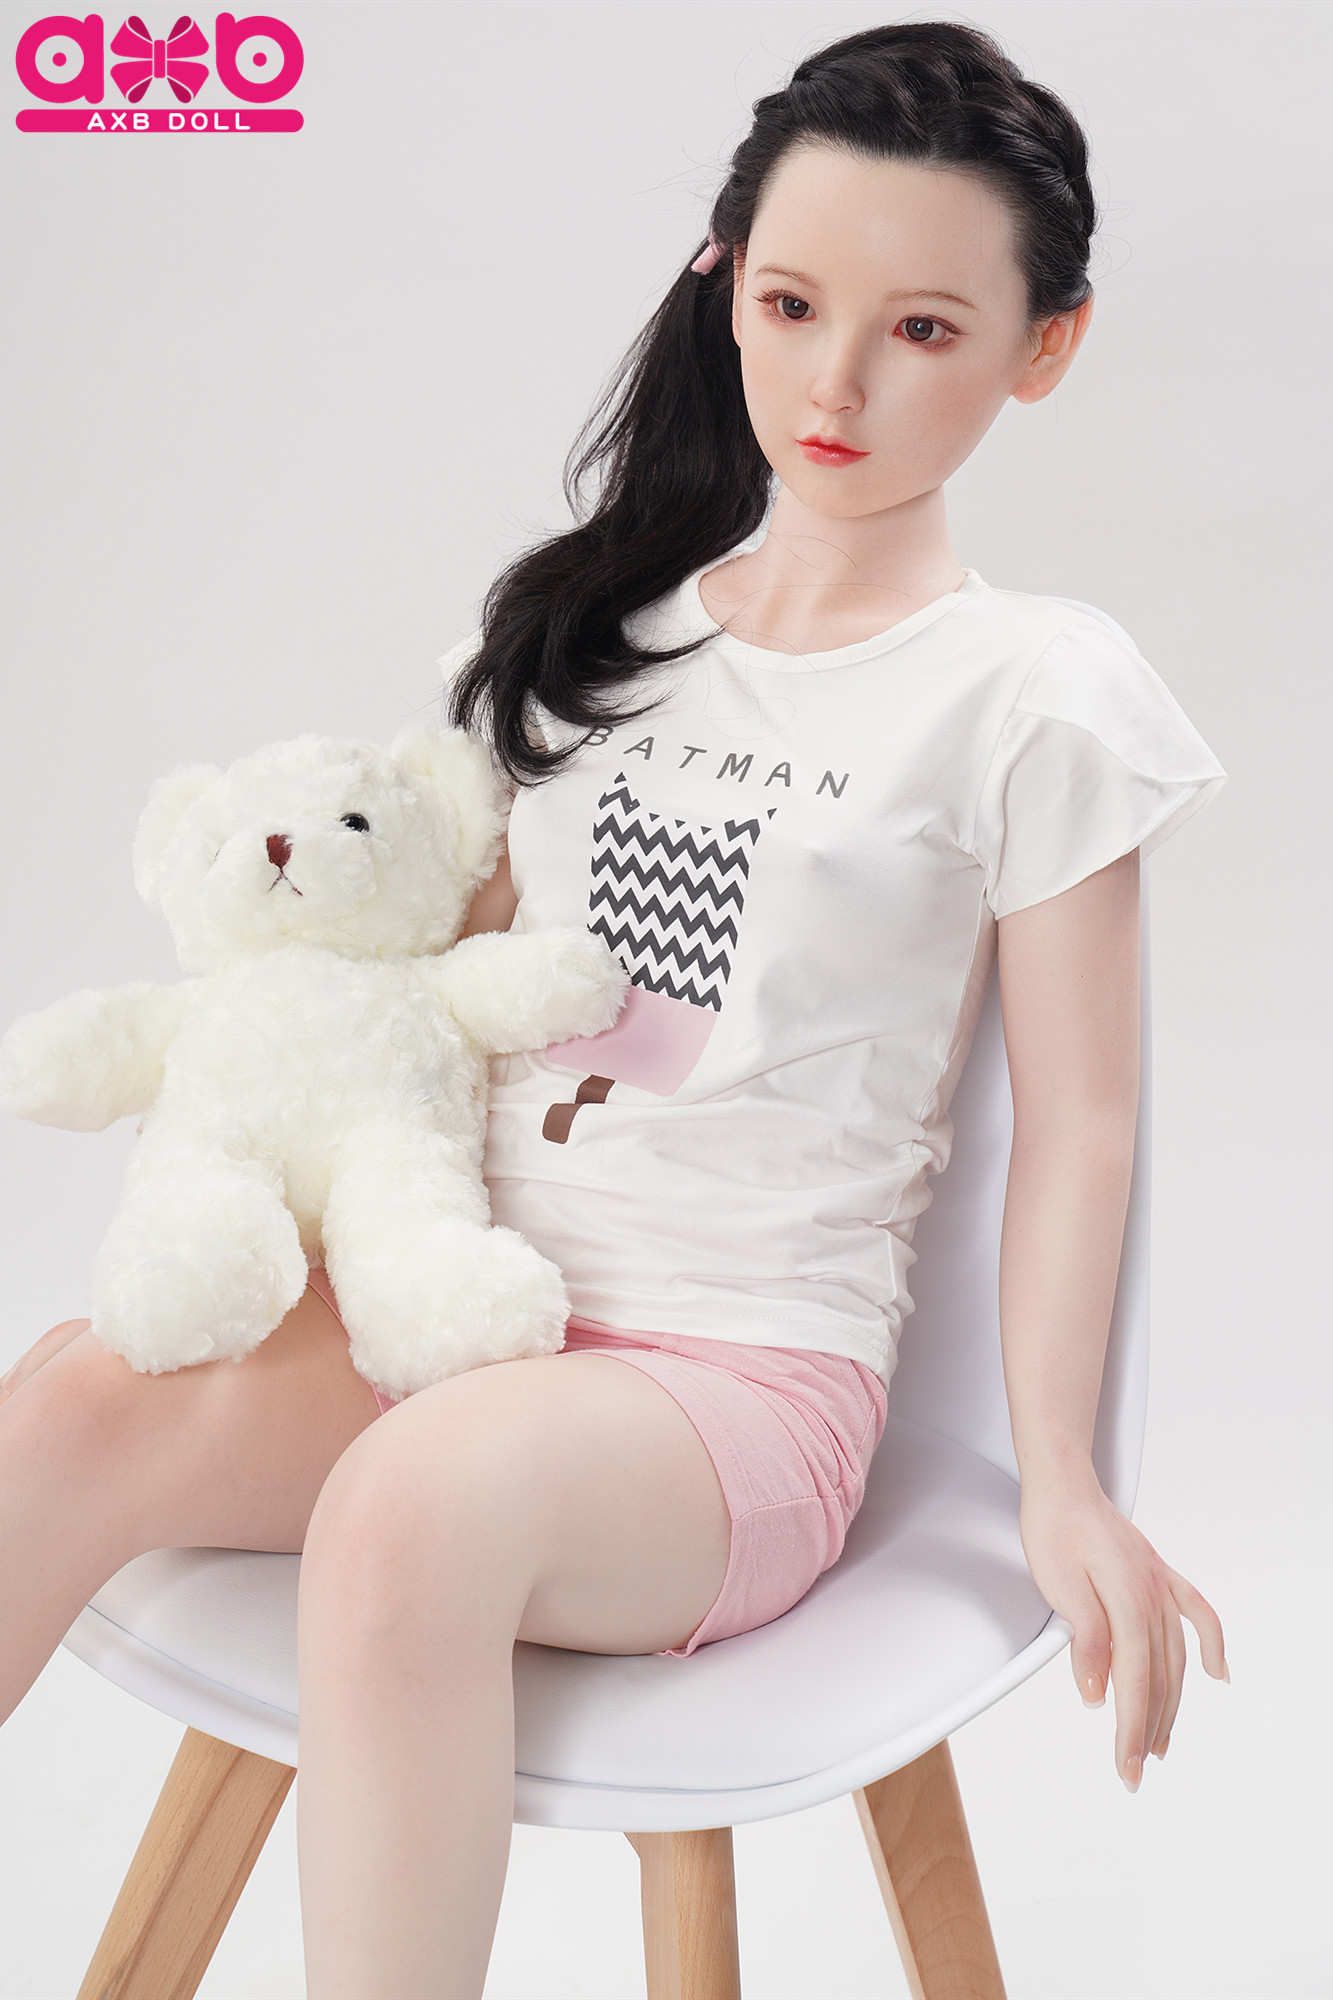 AXBDOLL 130cm G36# Full Silicone Doll Anime Sex Dolls - Click Image to Close